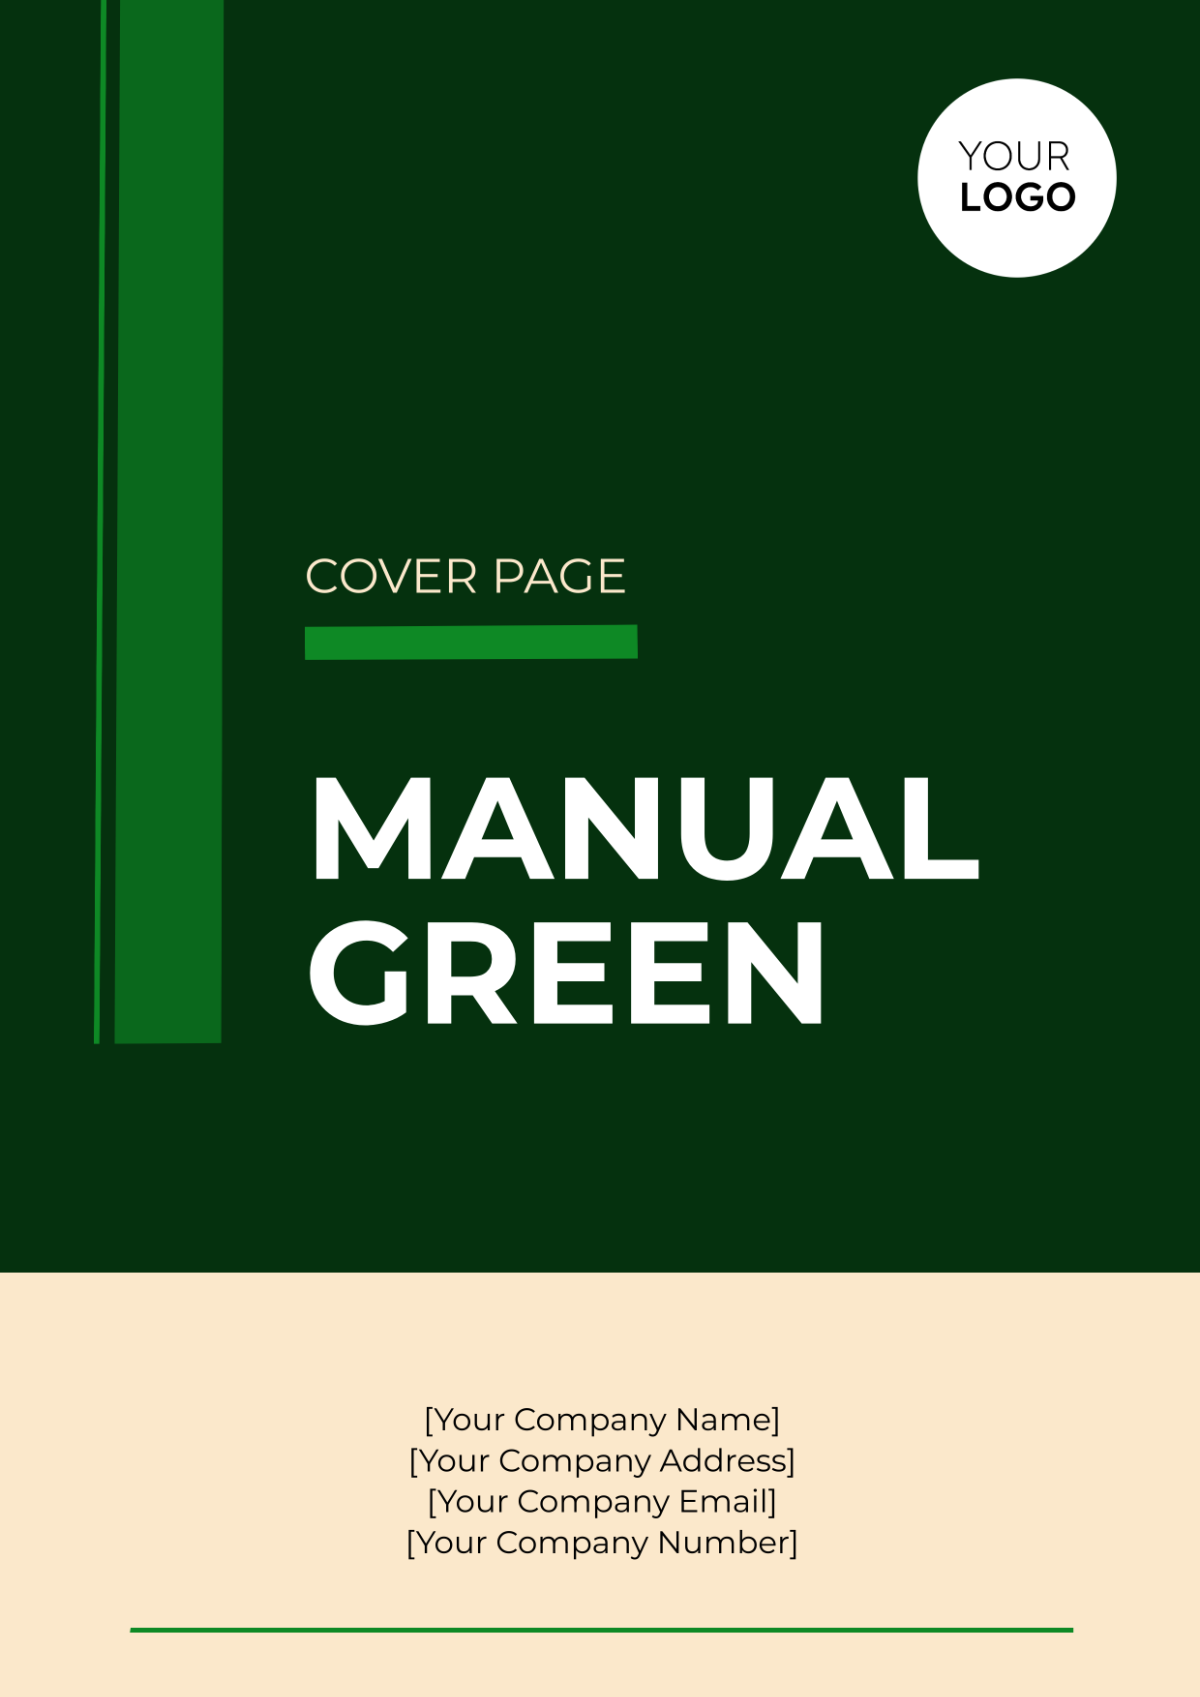 Manual Green Cover Page